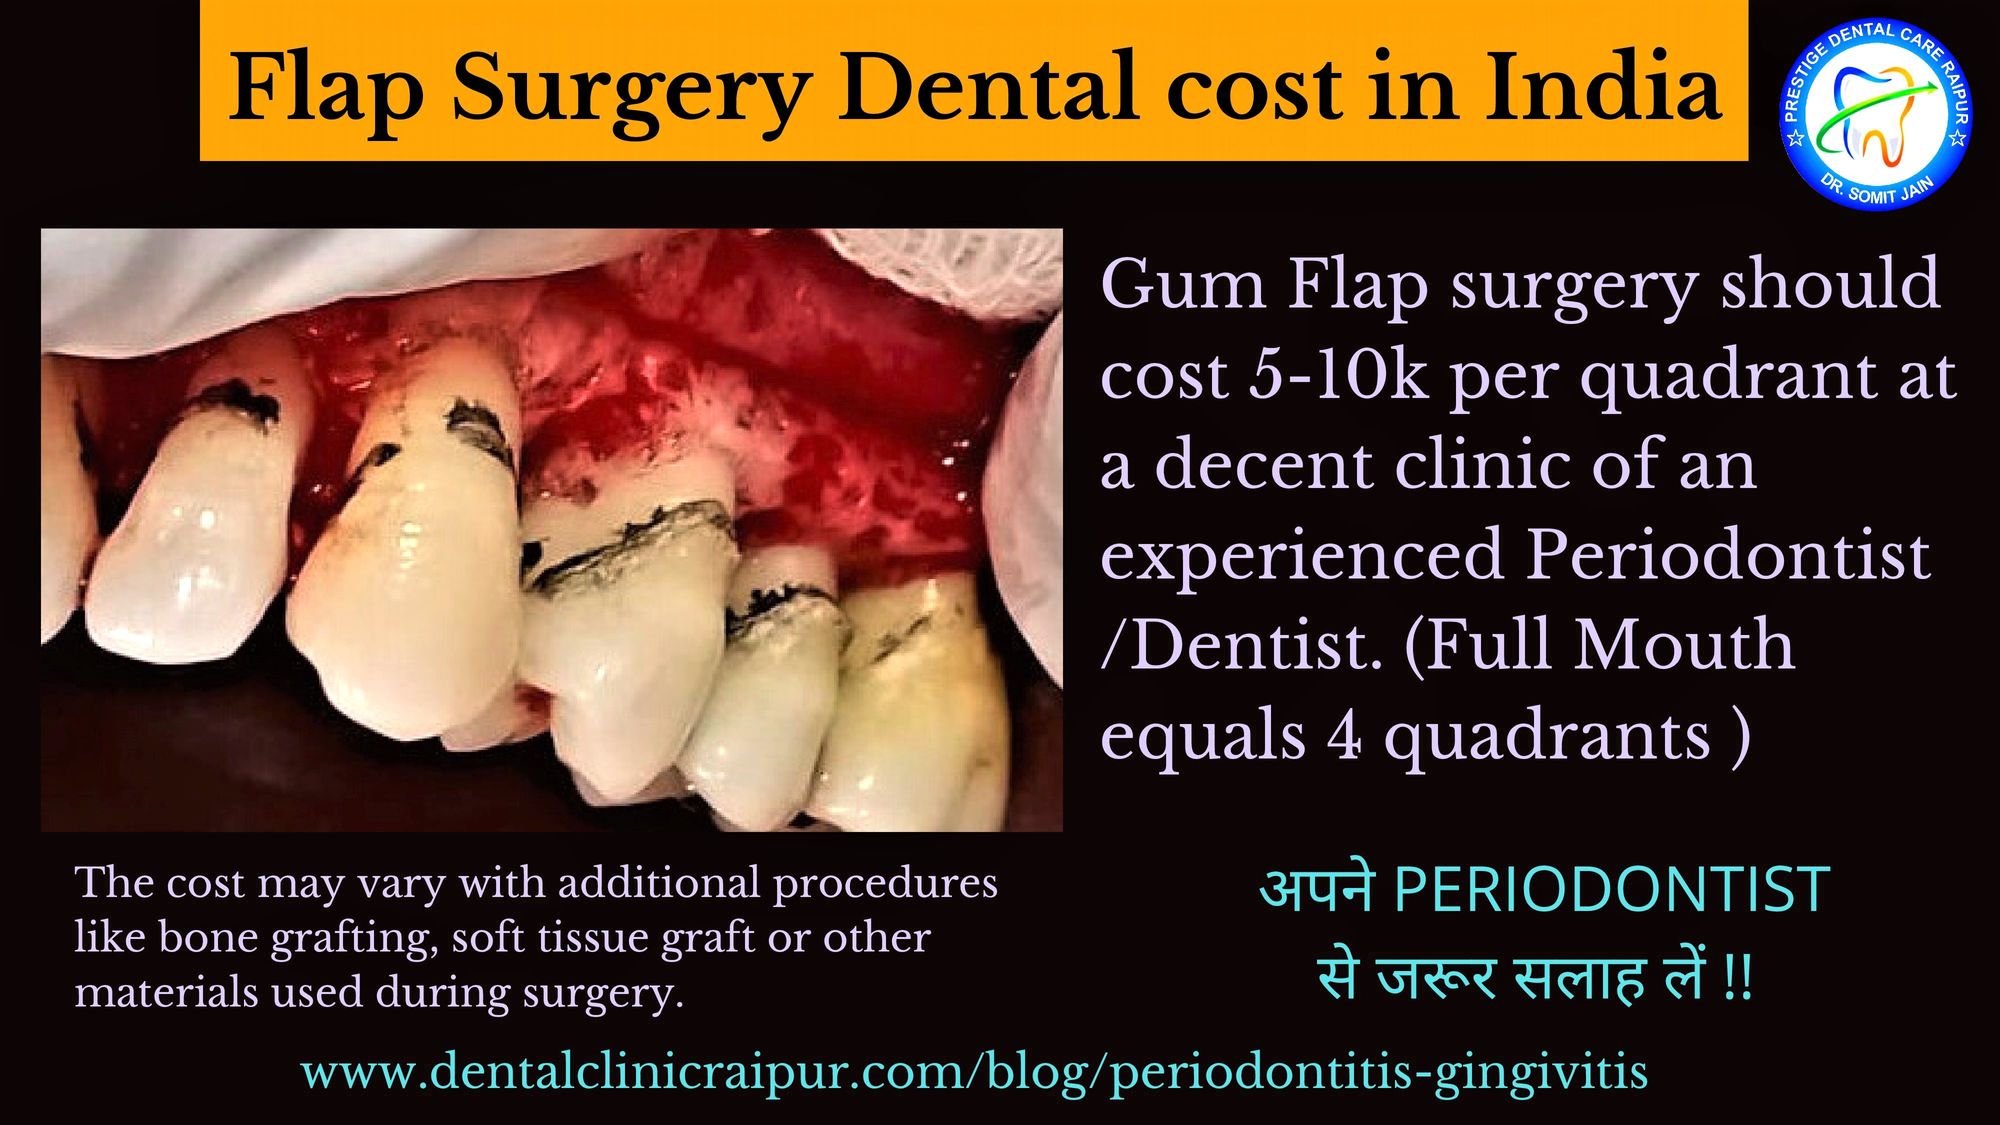 Flap Surgery Dental cost in India